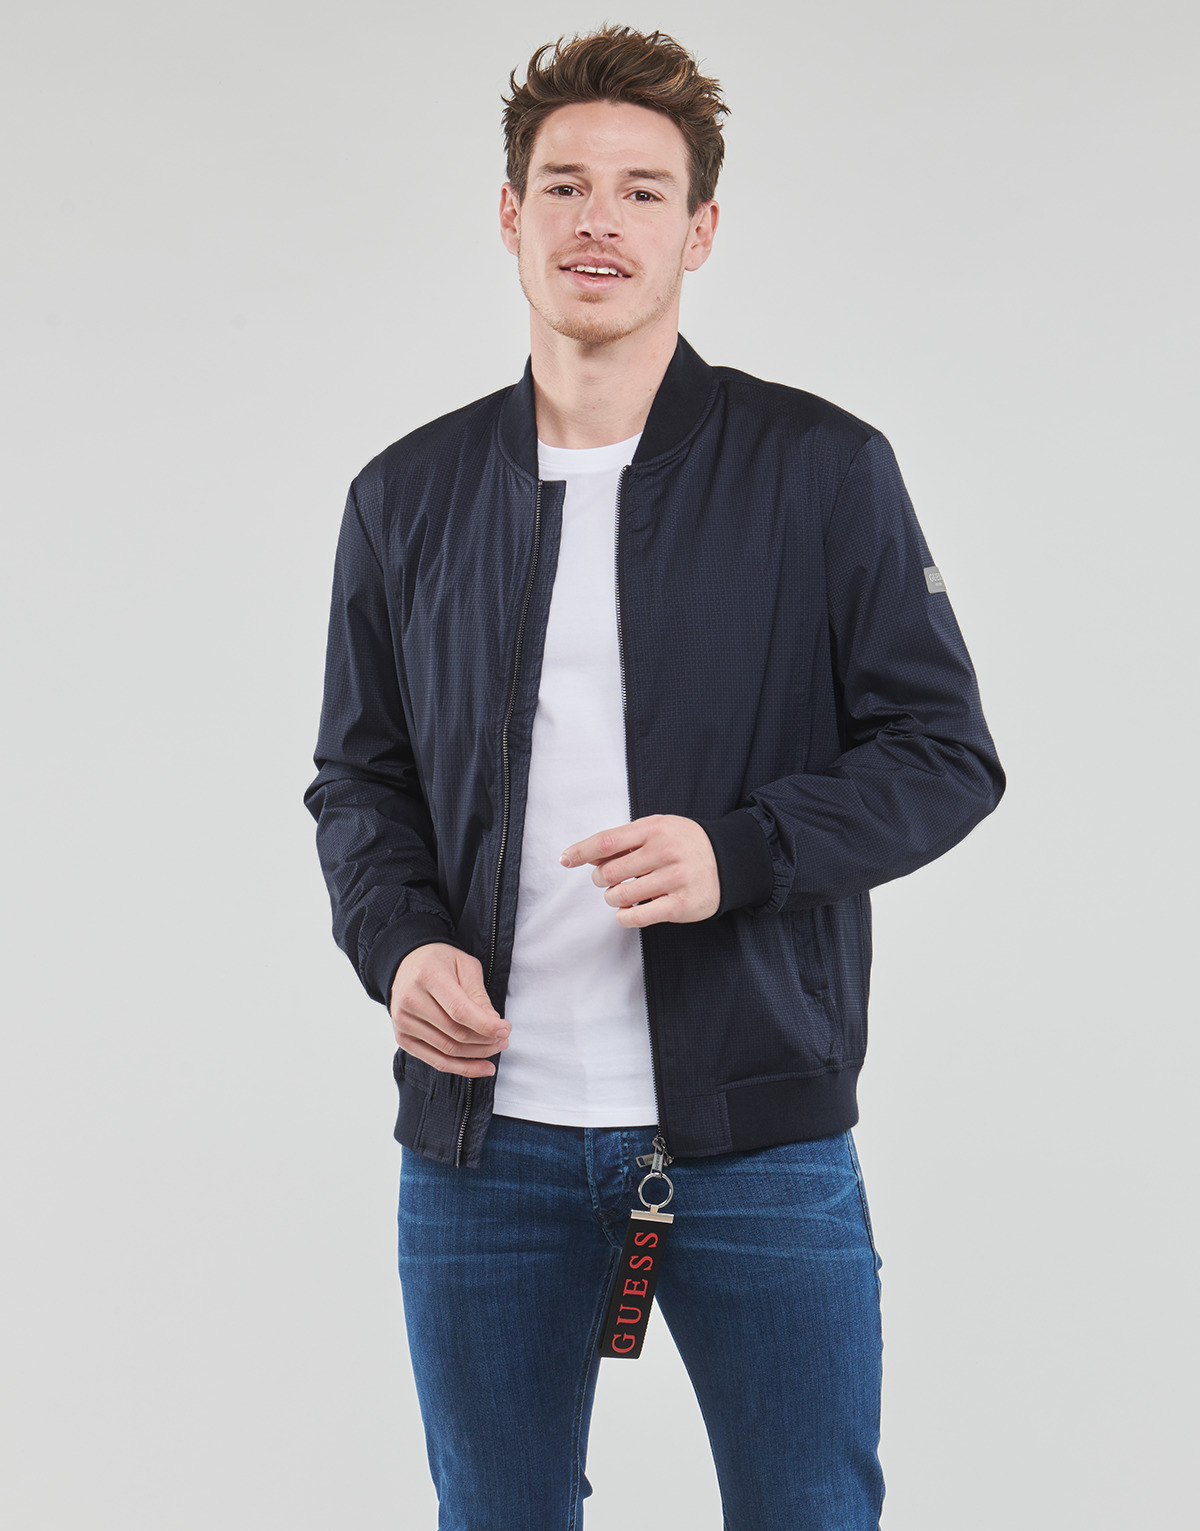 Guess Marine STRETCH BOMBER AbyGxNf2